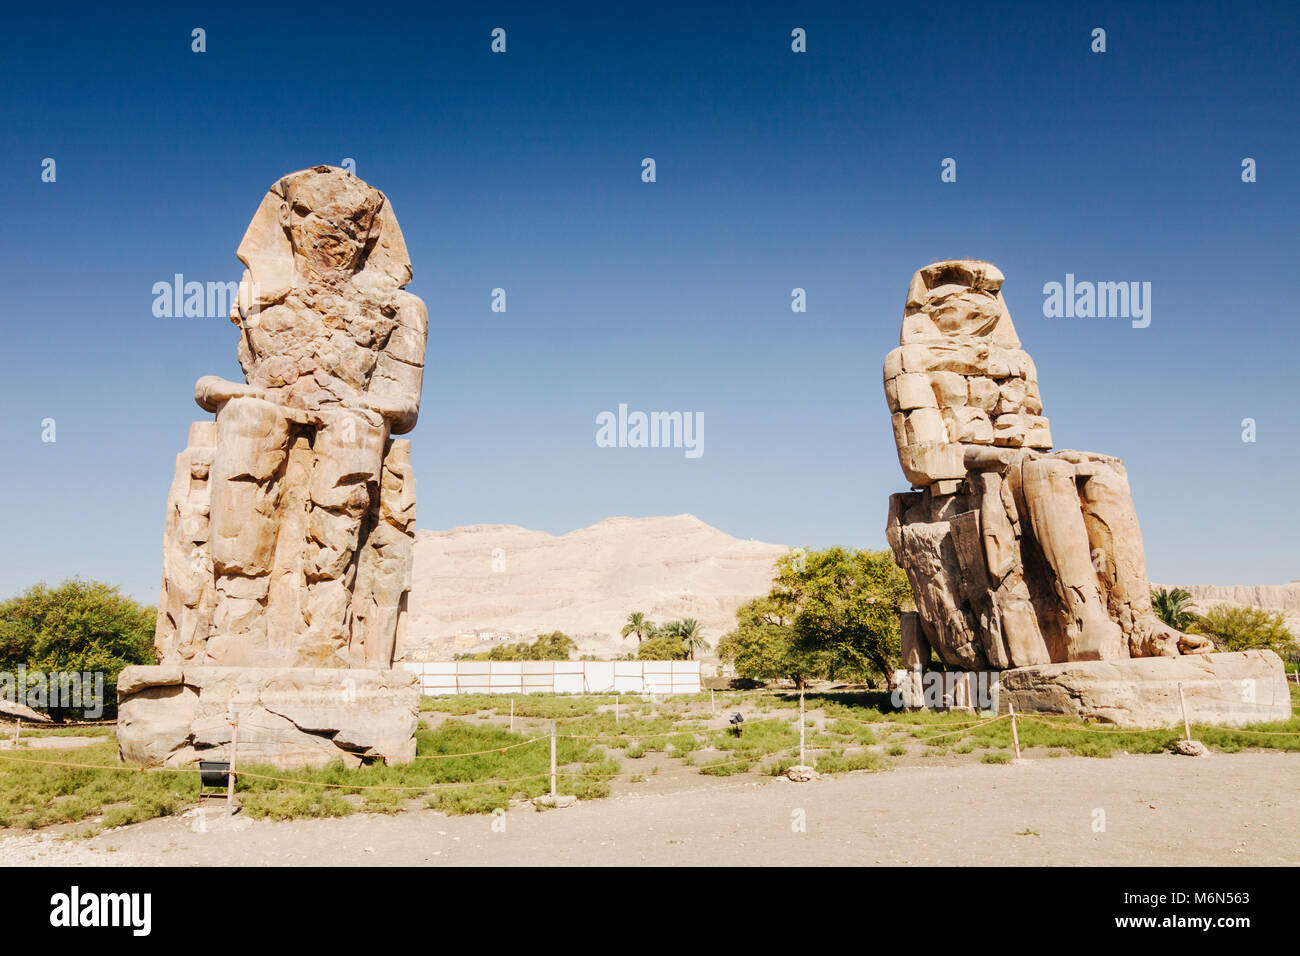 Luxor, Egypt. Colossi of Memnon,  two massive stone statues of the Pharaoh Amenhotep III, who reigned in Egypt during the Dynasty XVIII. Stock Photo